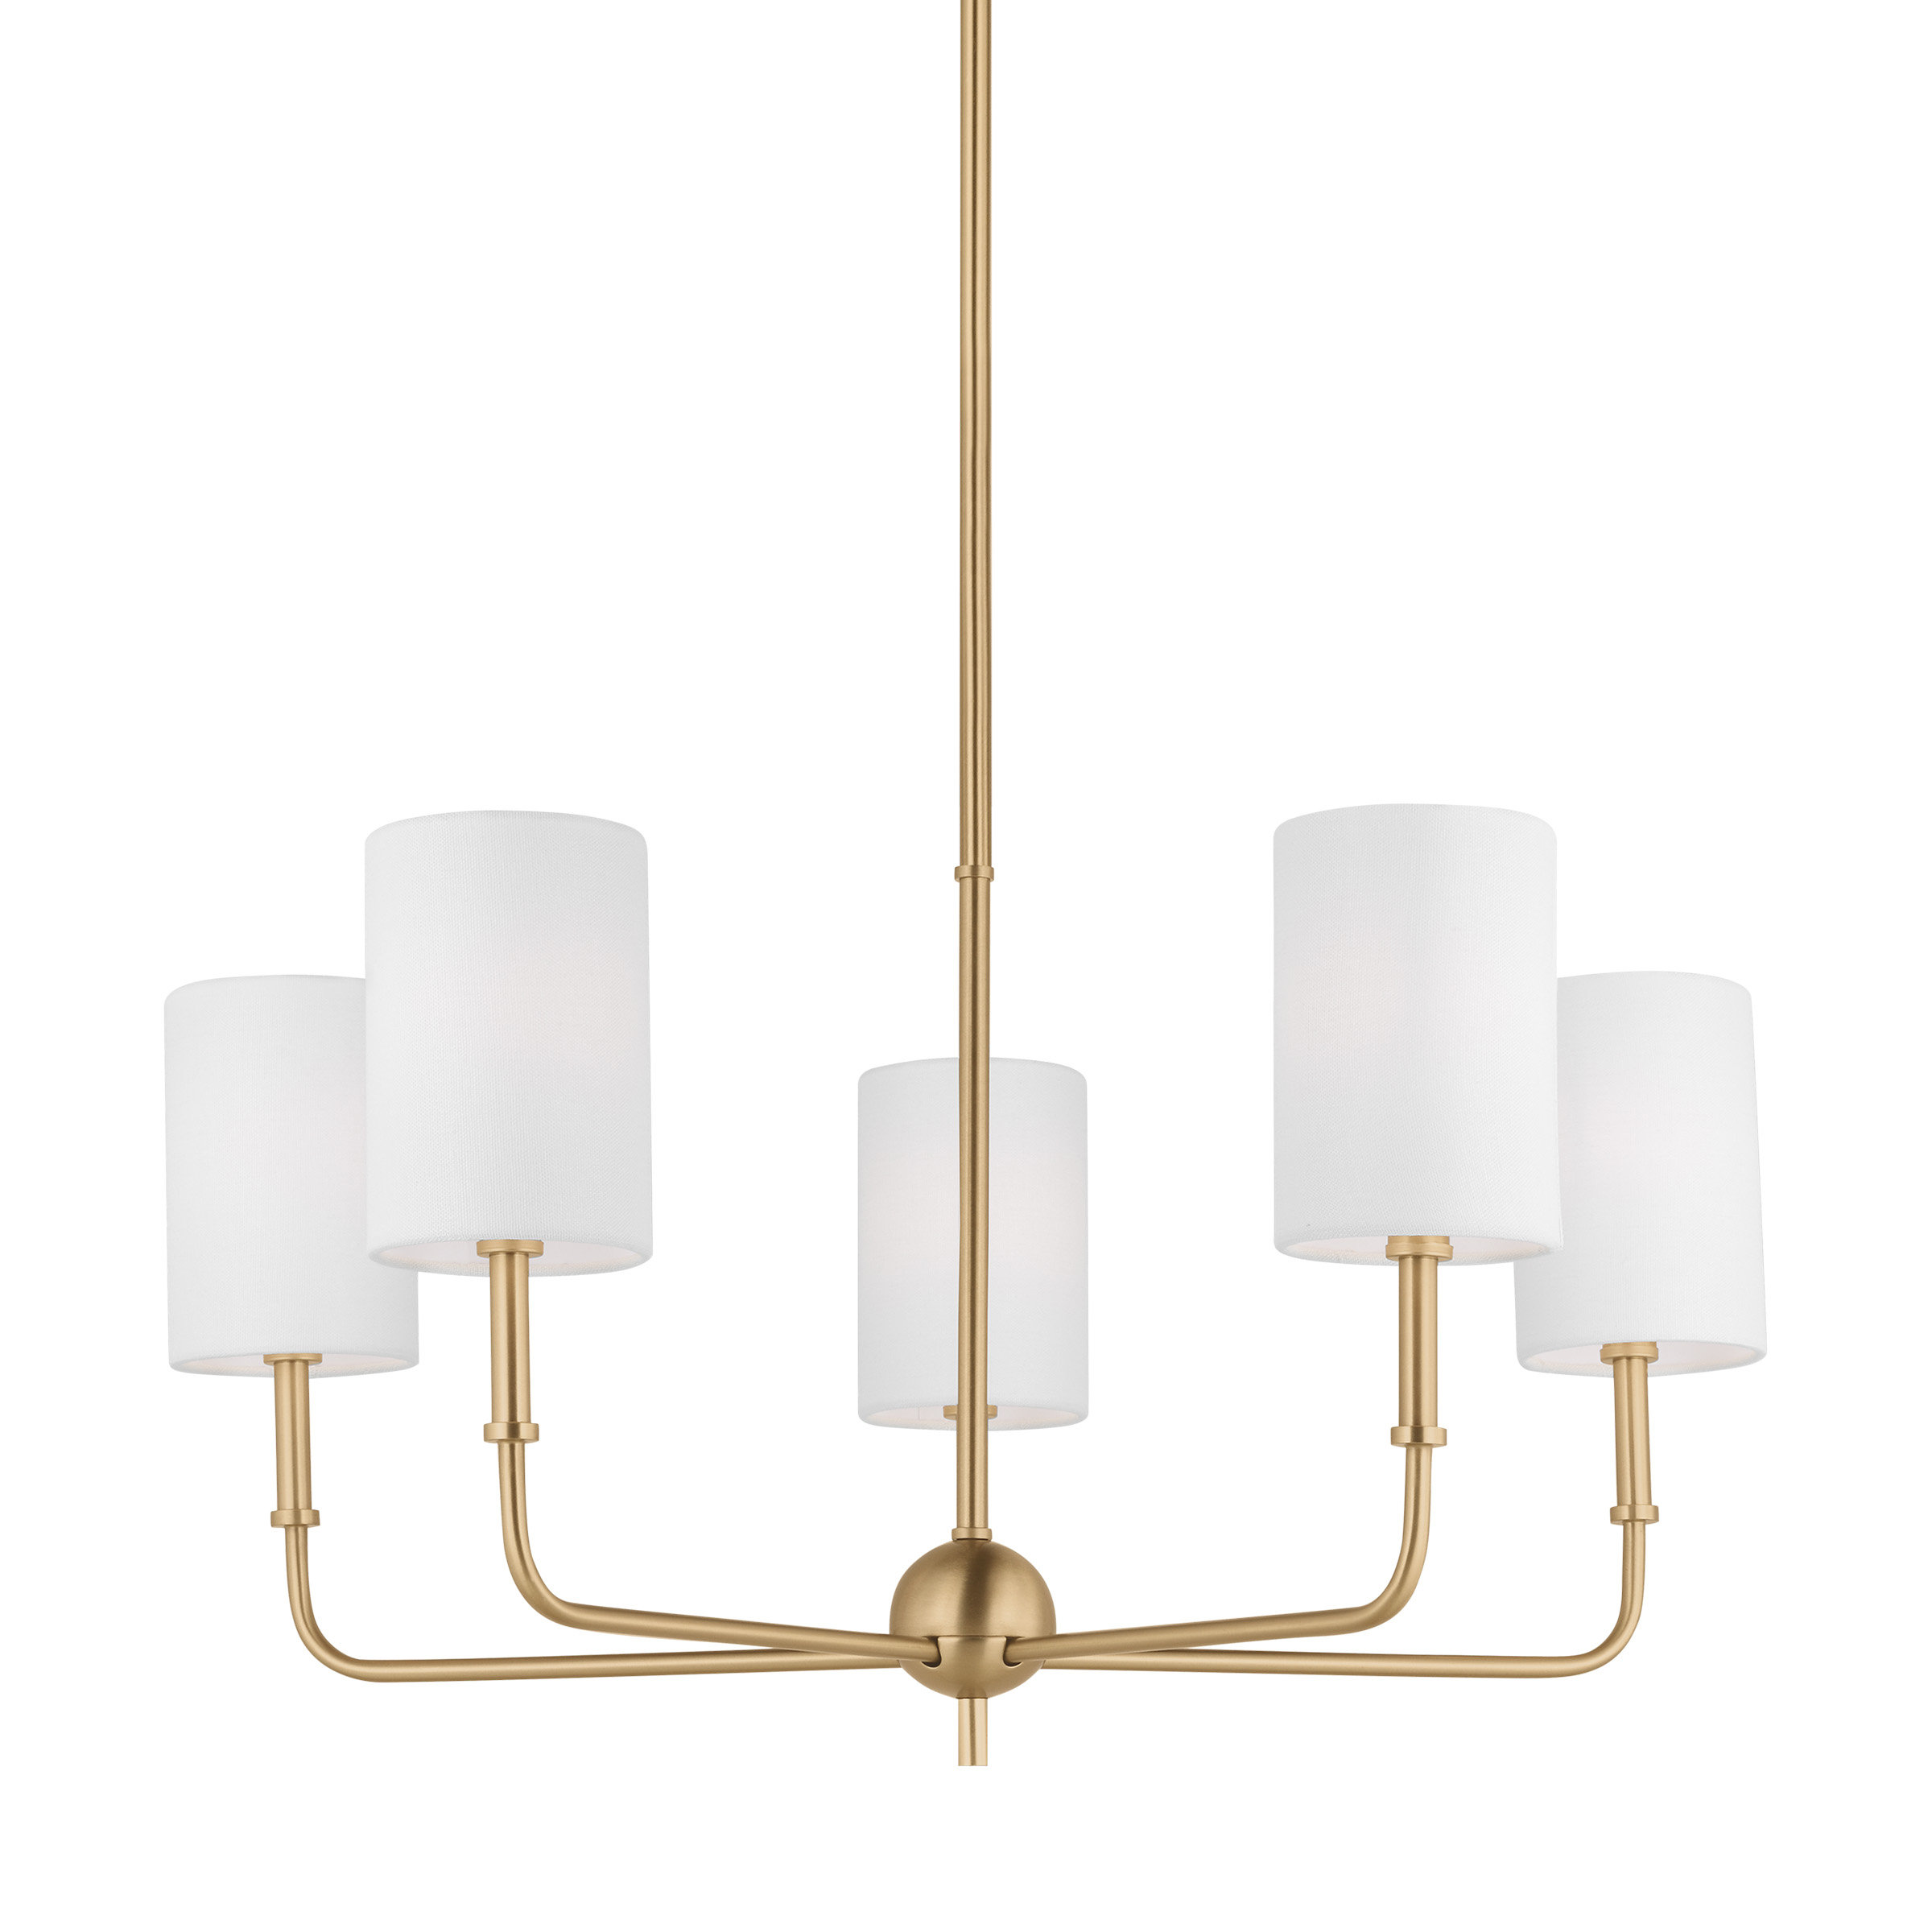 Visual Comfort Studio Franklin Table Lamp in Burnished Brass And